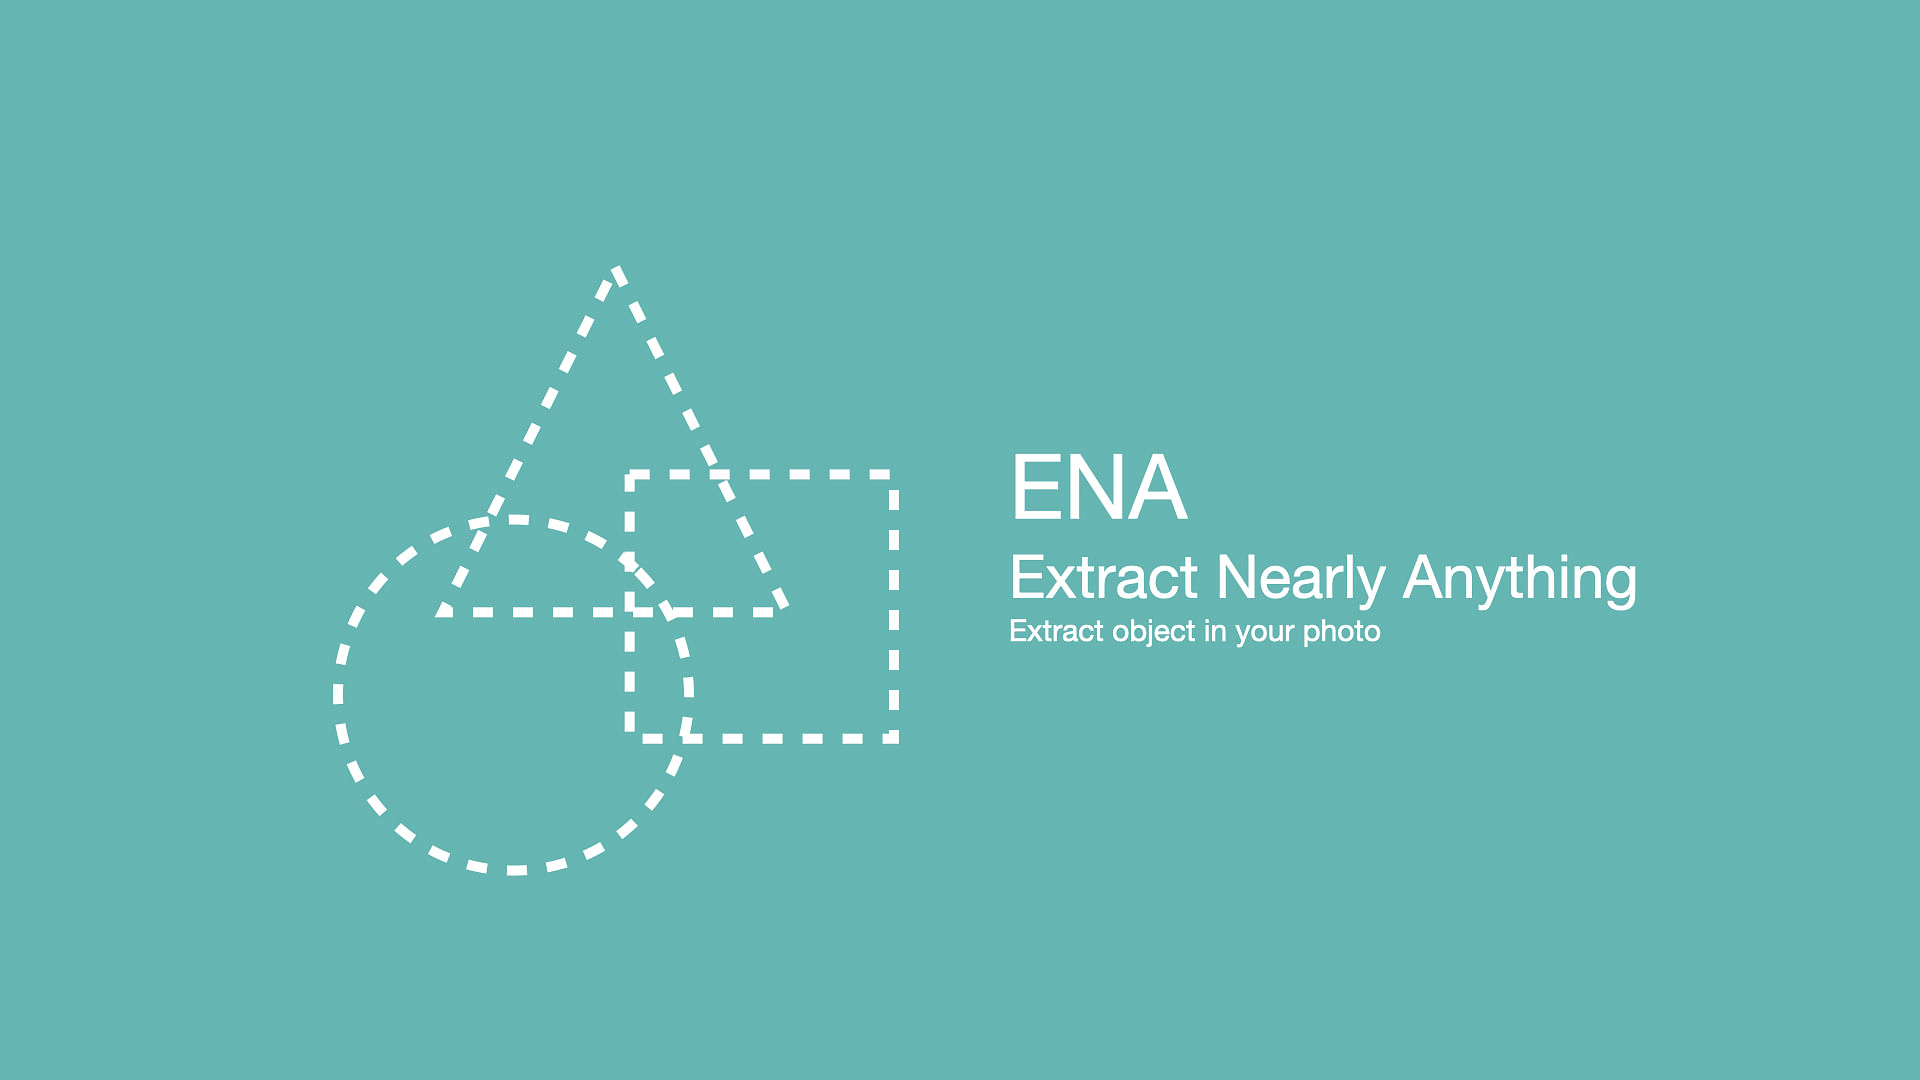 ENA - Extract Nearly Anything